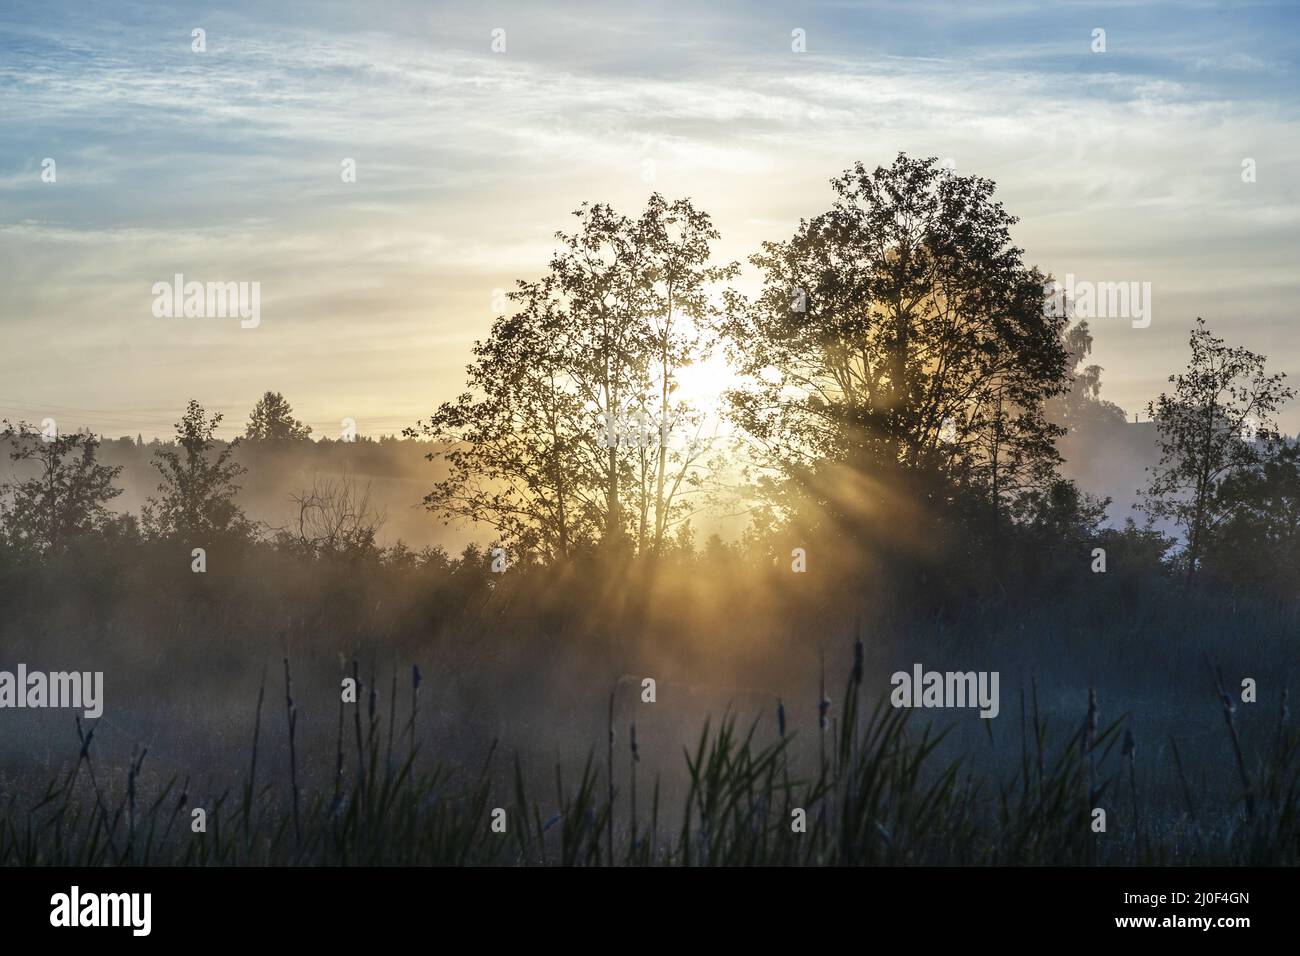 Sunlight penetrates tree branches during sunrise Stock Photo